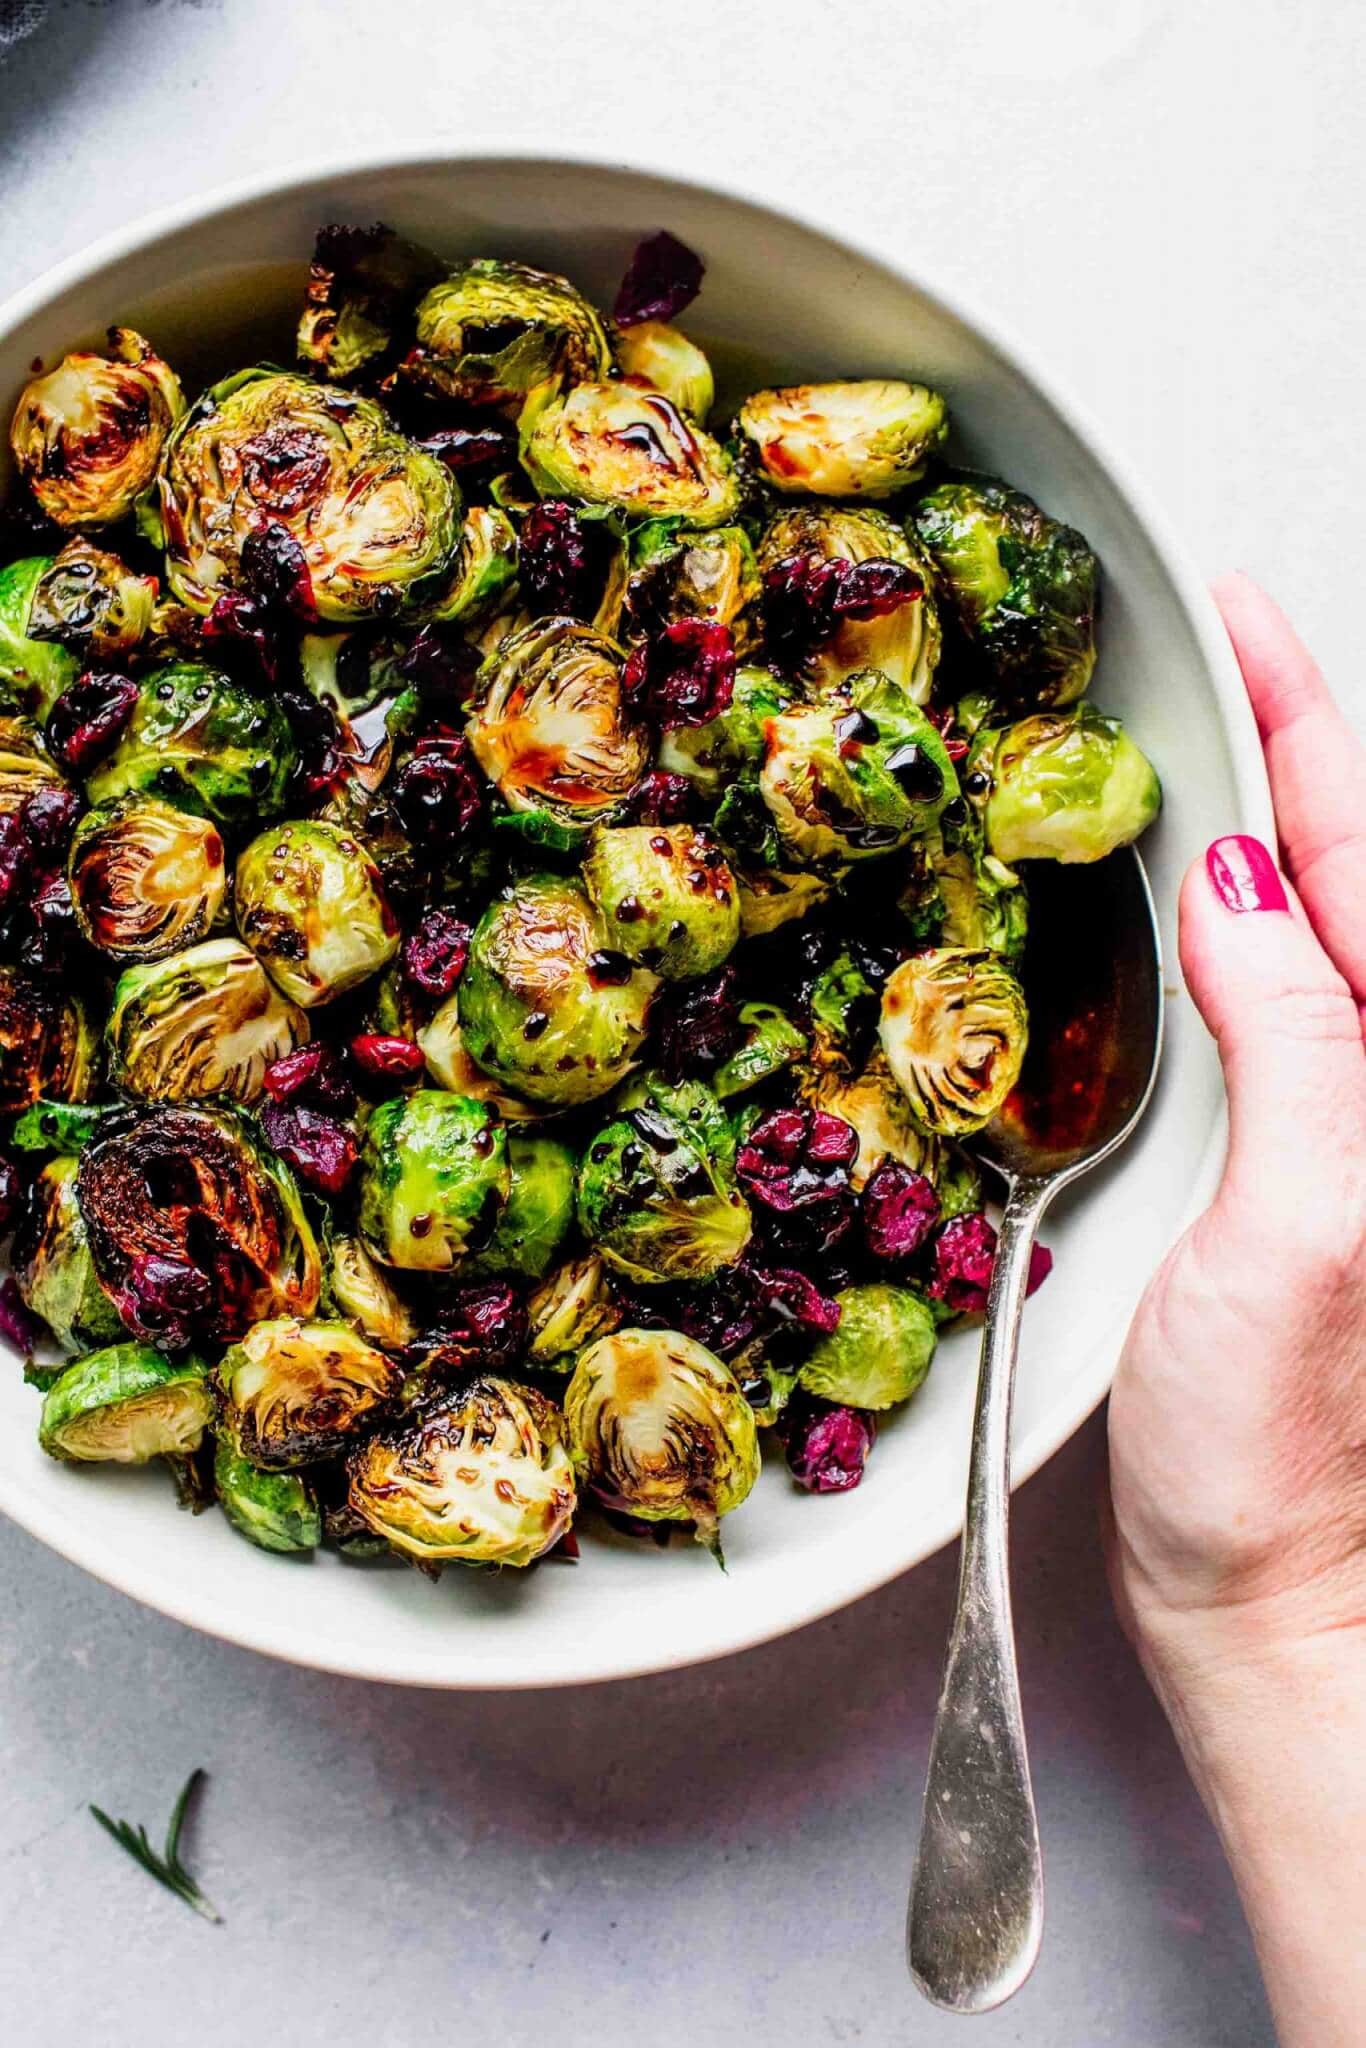 Roasted brussels sprouts in bowl drizzled with balsamic glaze and sprinkled with cranberries.